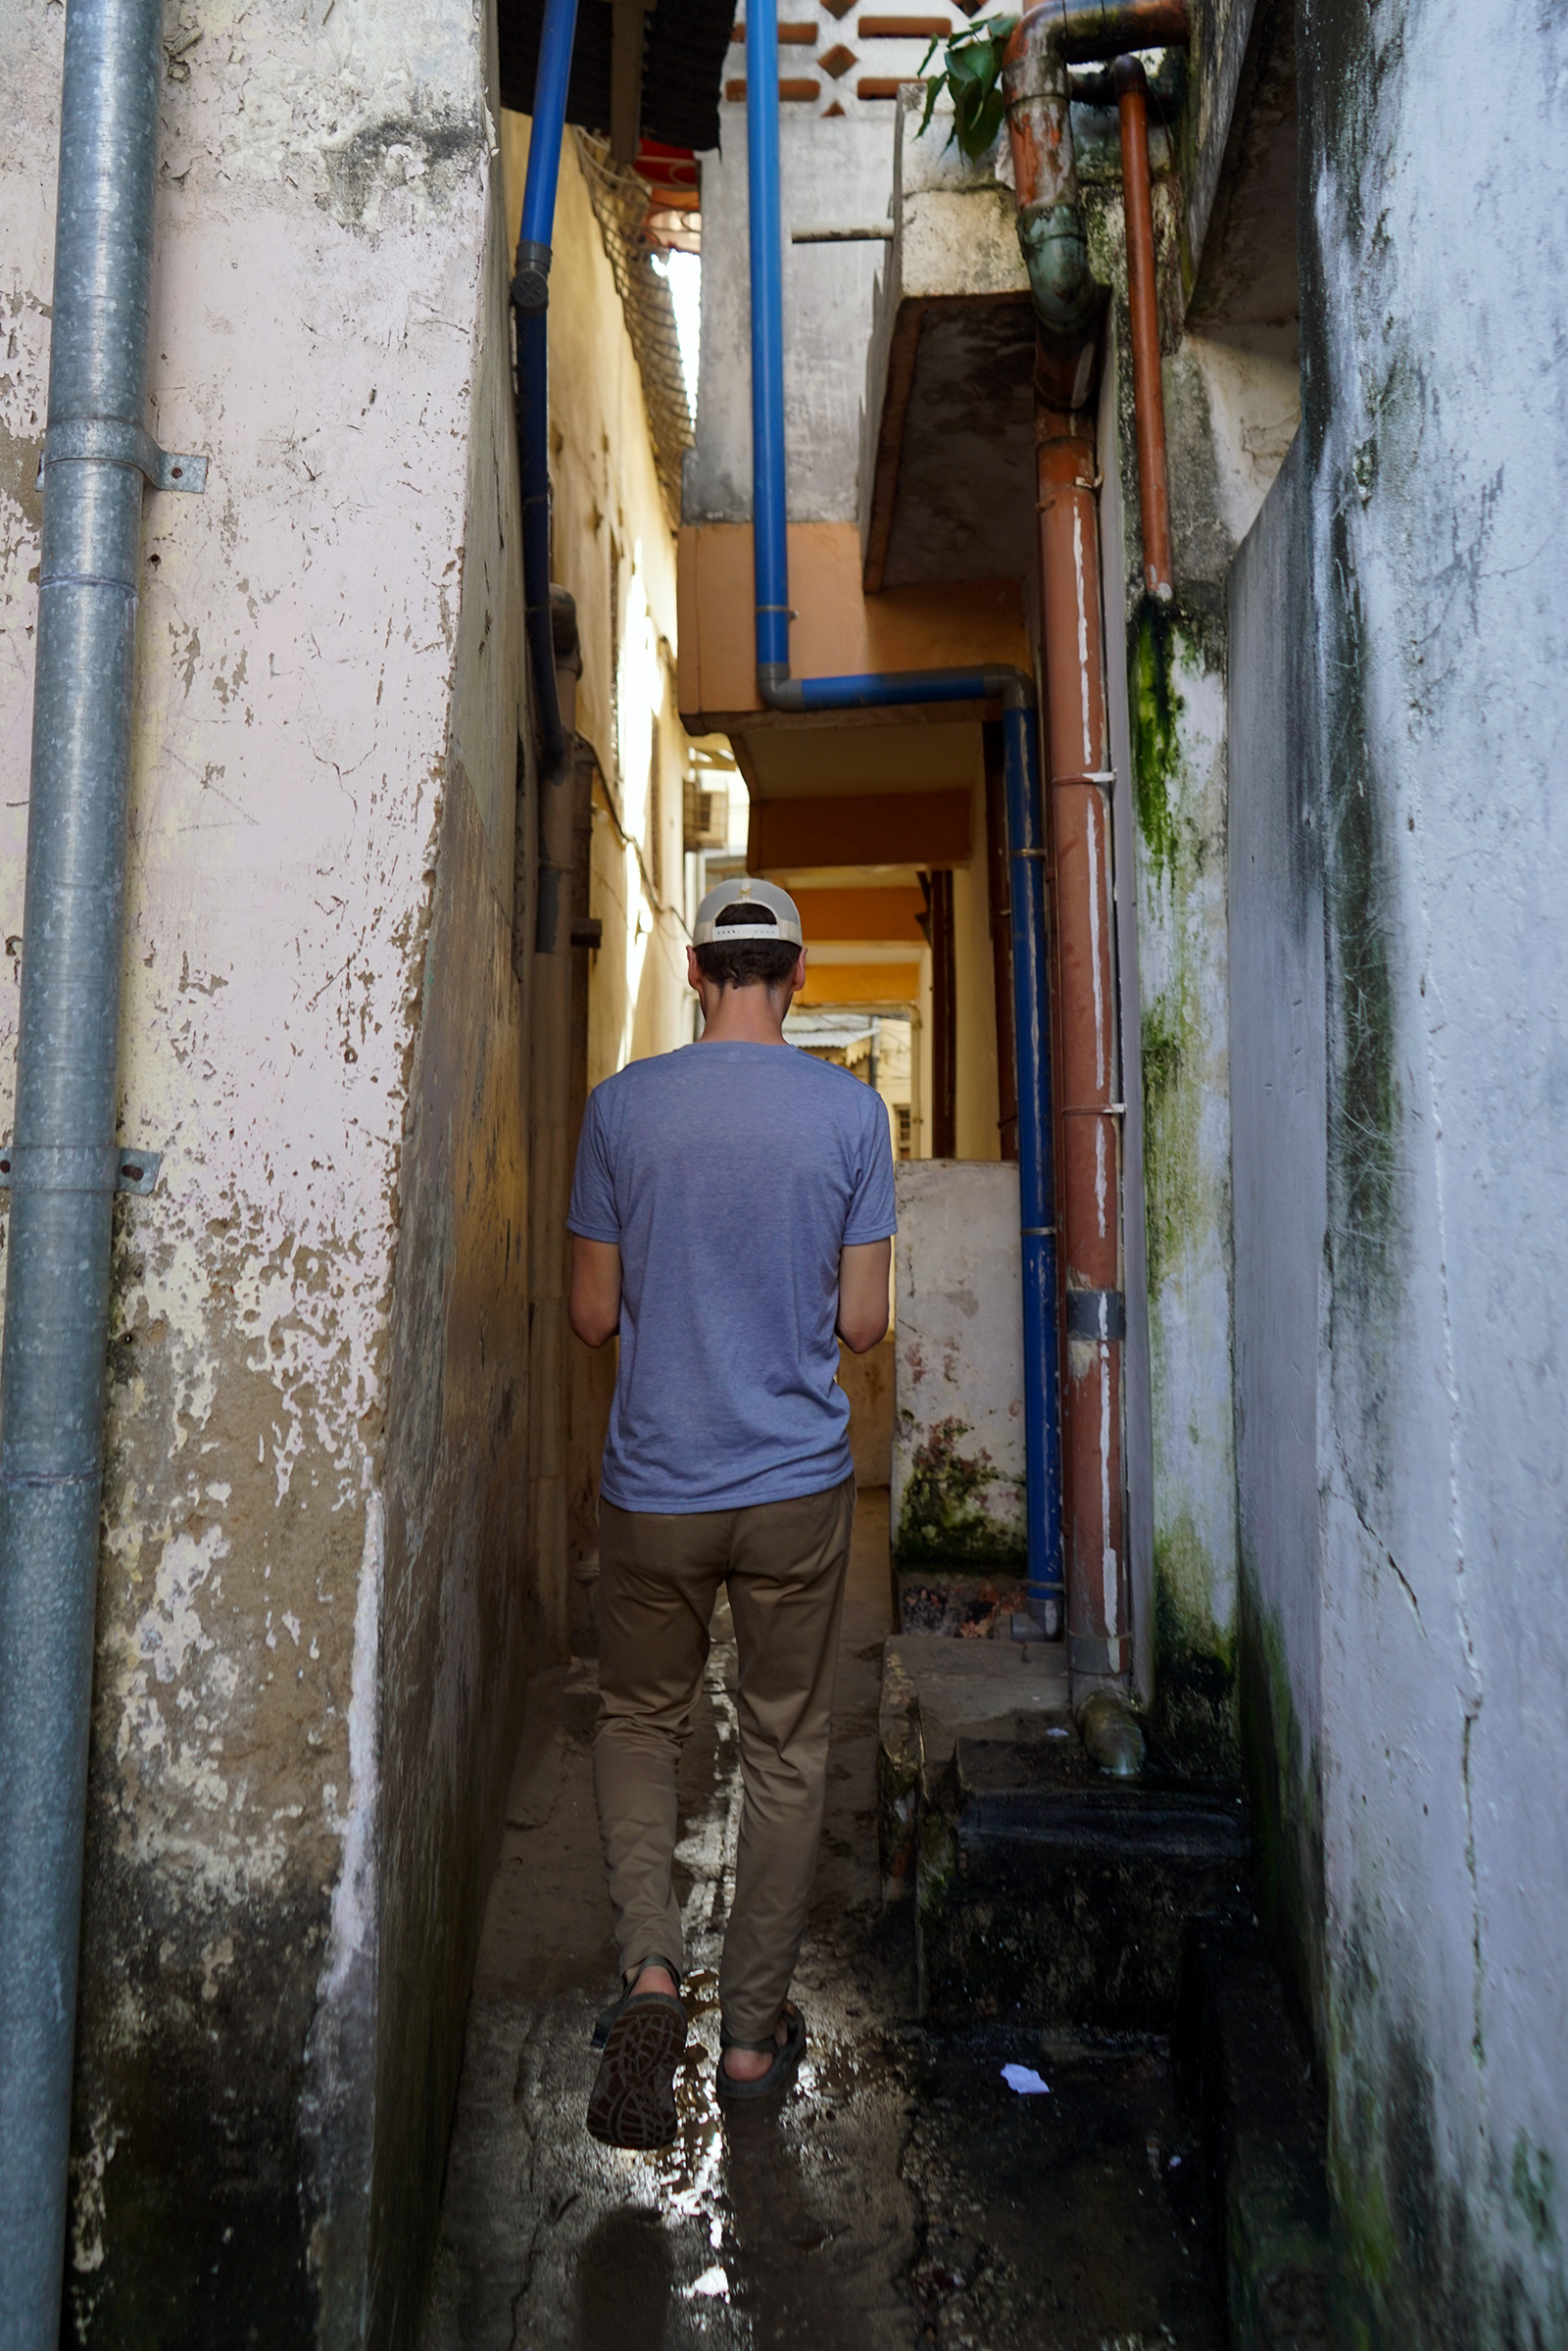 Sightseeing in Stone Town